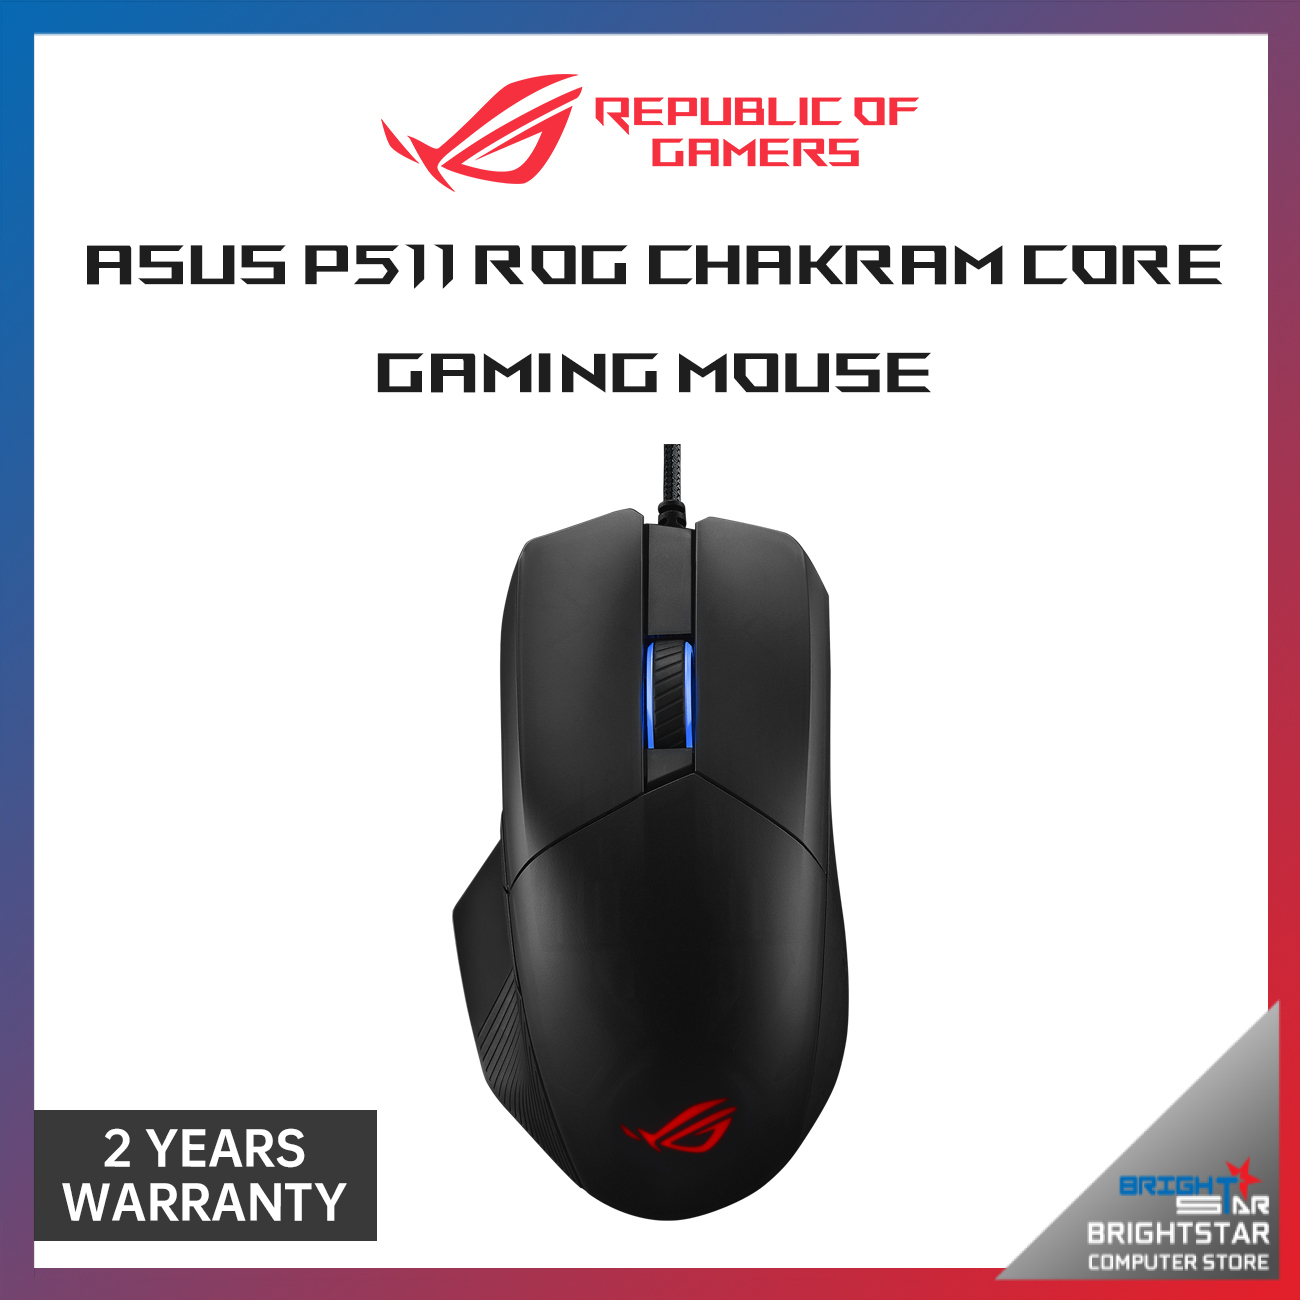 Asus Rog Chakram Core Rgb Gaming Mouse With Qi Charging Bluetooth Wireless Wired 16 000 Dpi Optical Sensor Brightstar Computer